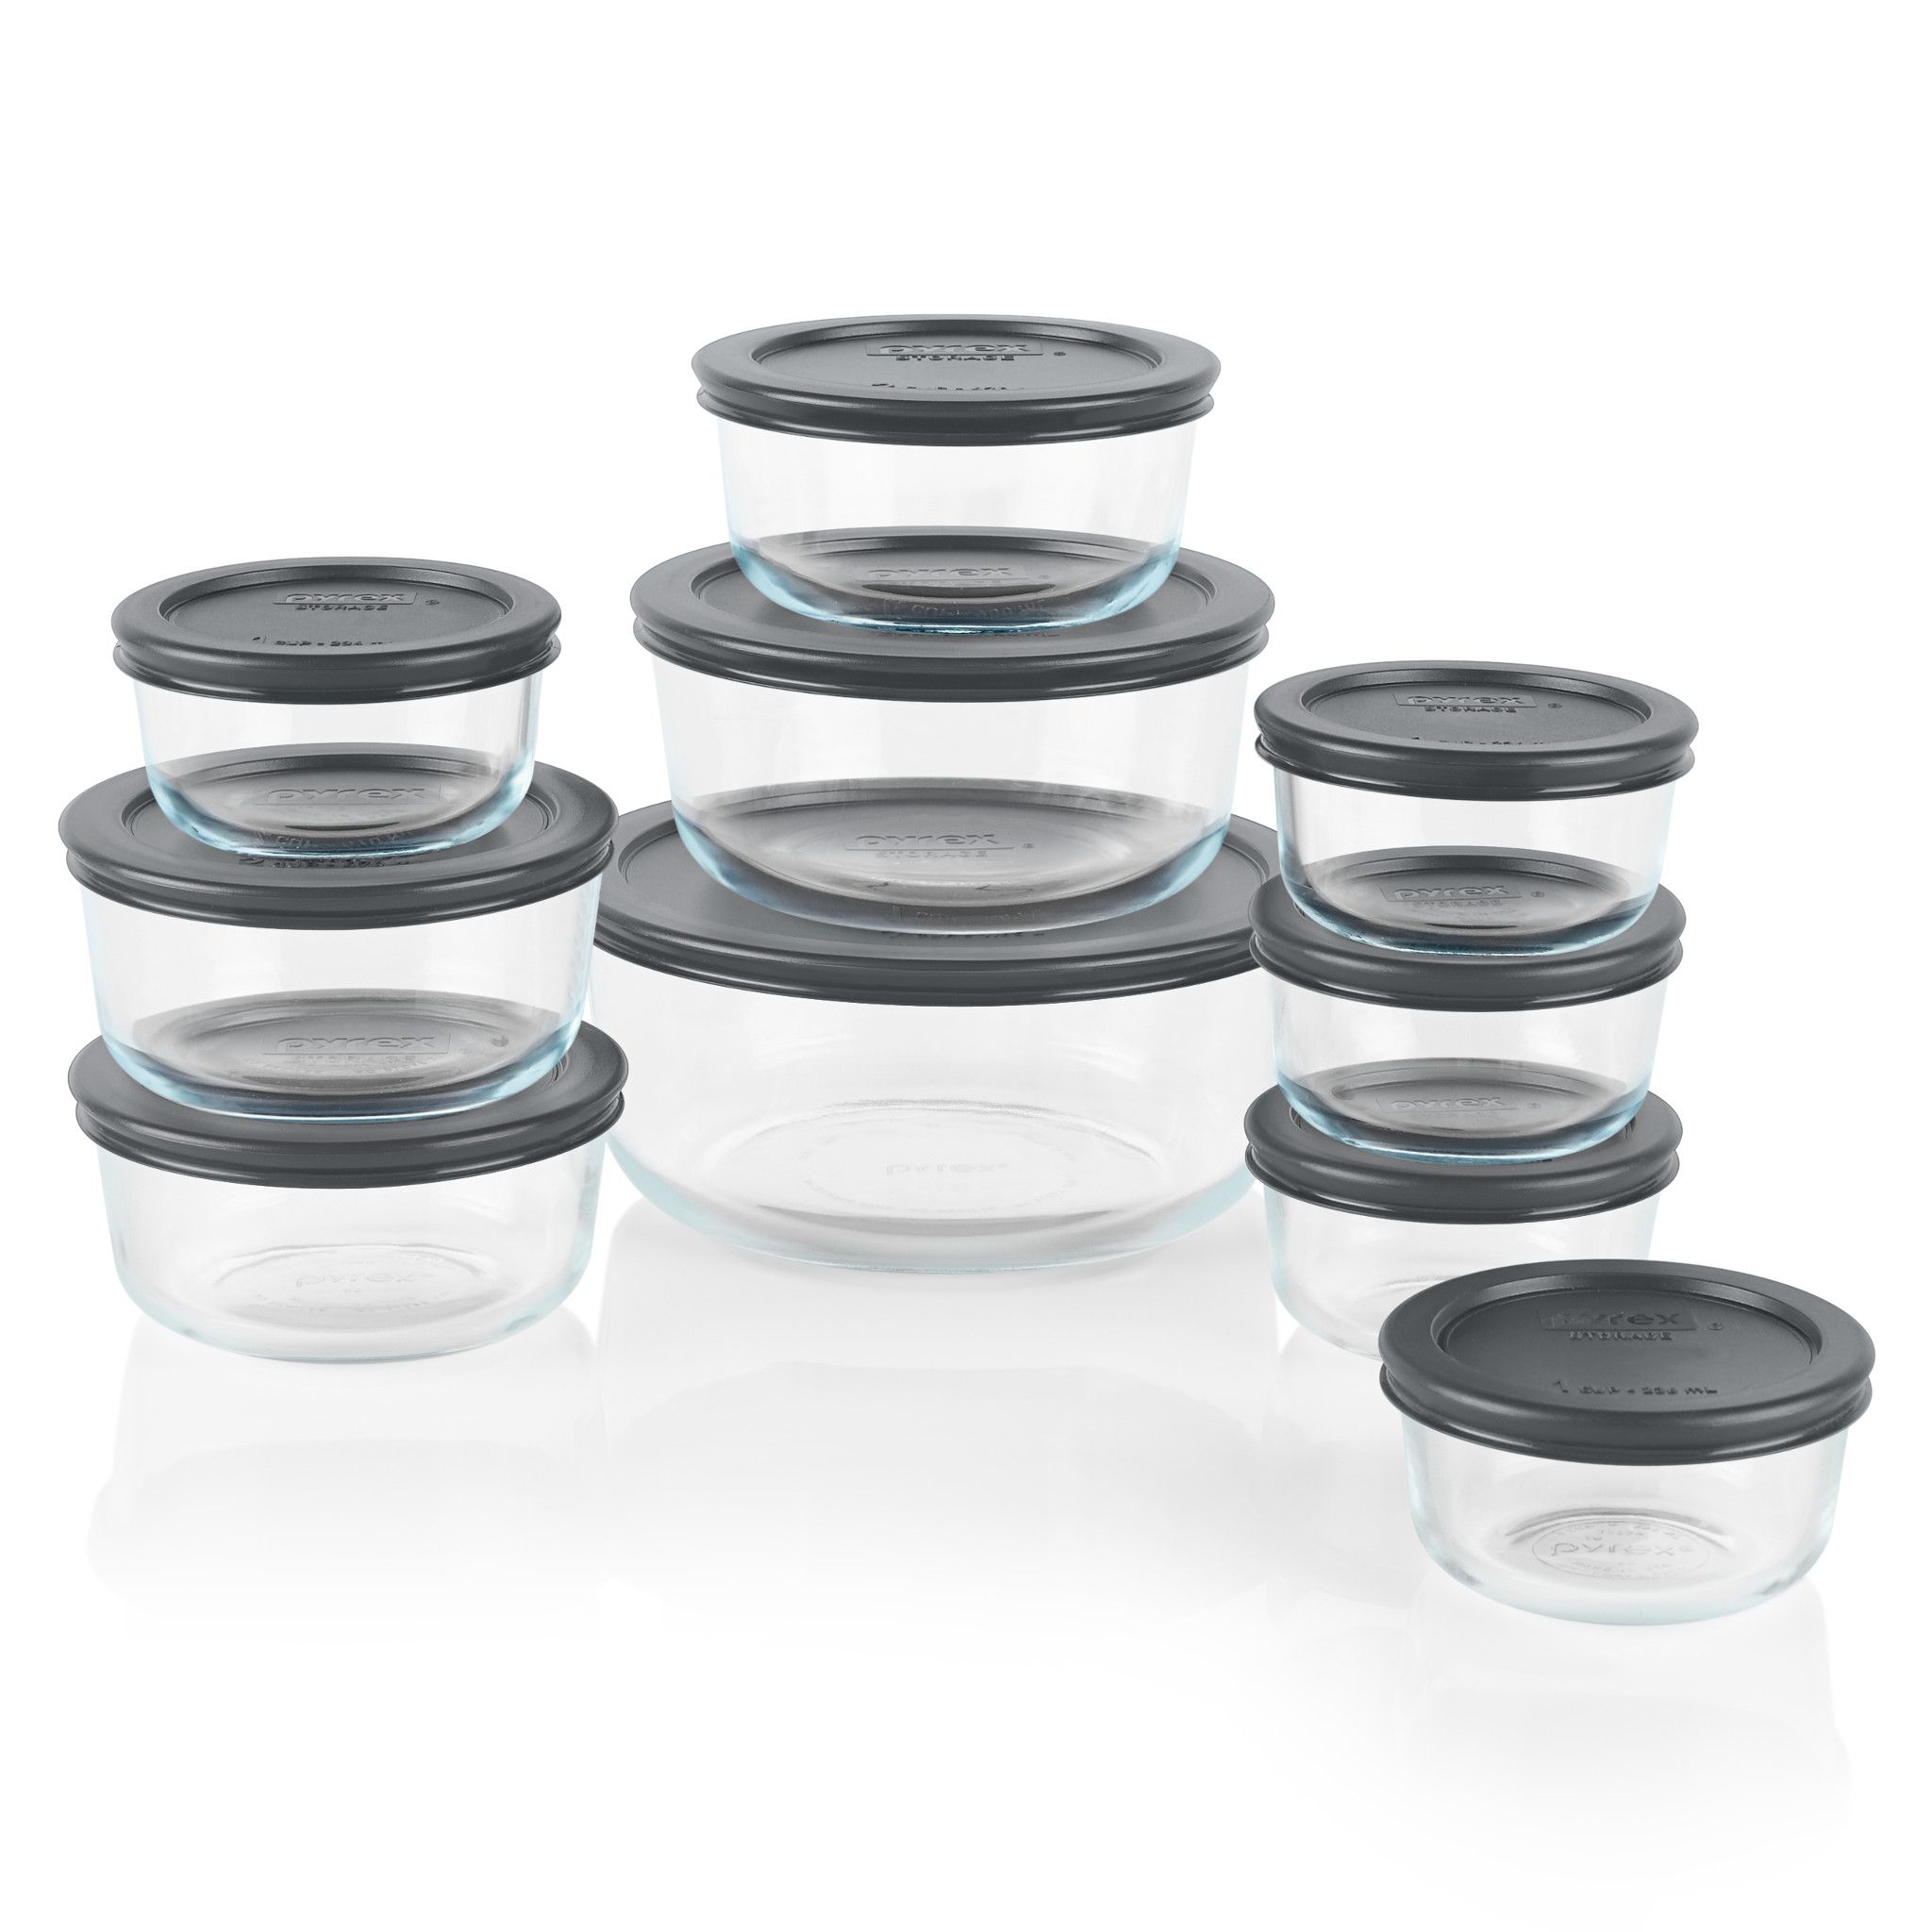 Simply Store 20-piece Set with Gray Lids